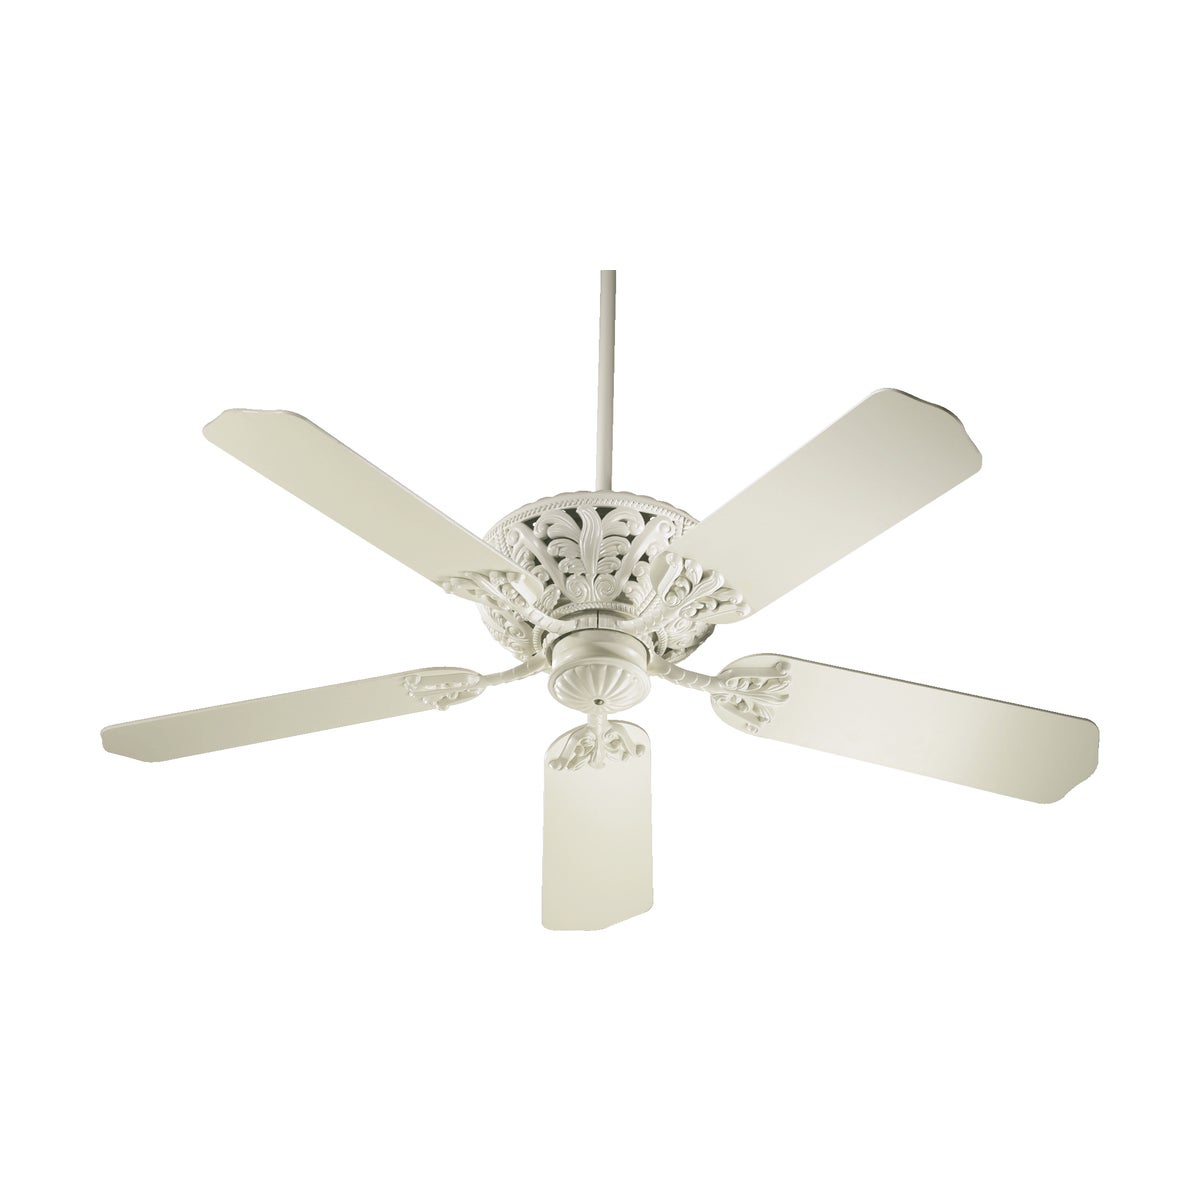 Windsor 52" Antique White Traditional Ceiling Fan